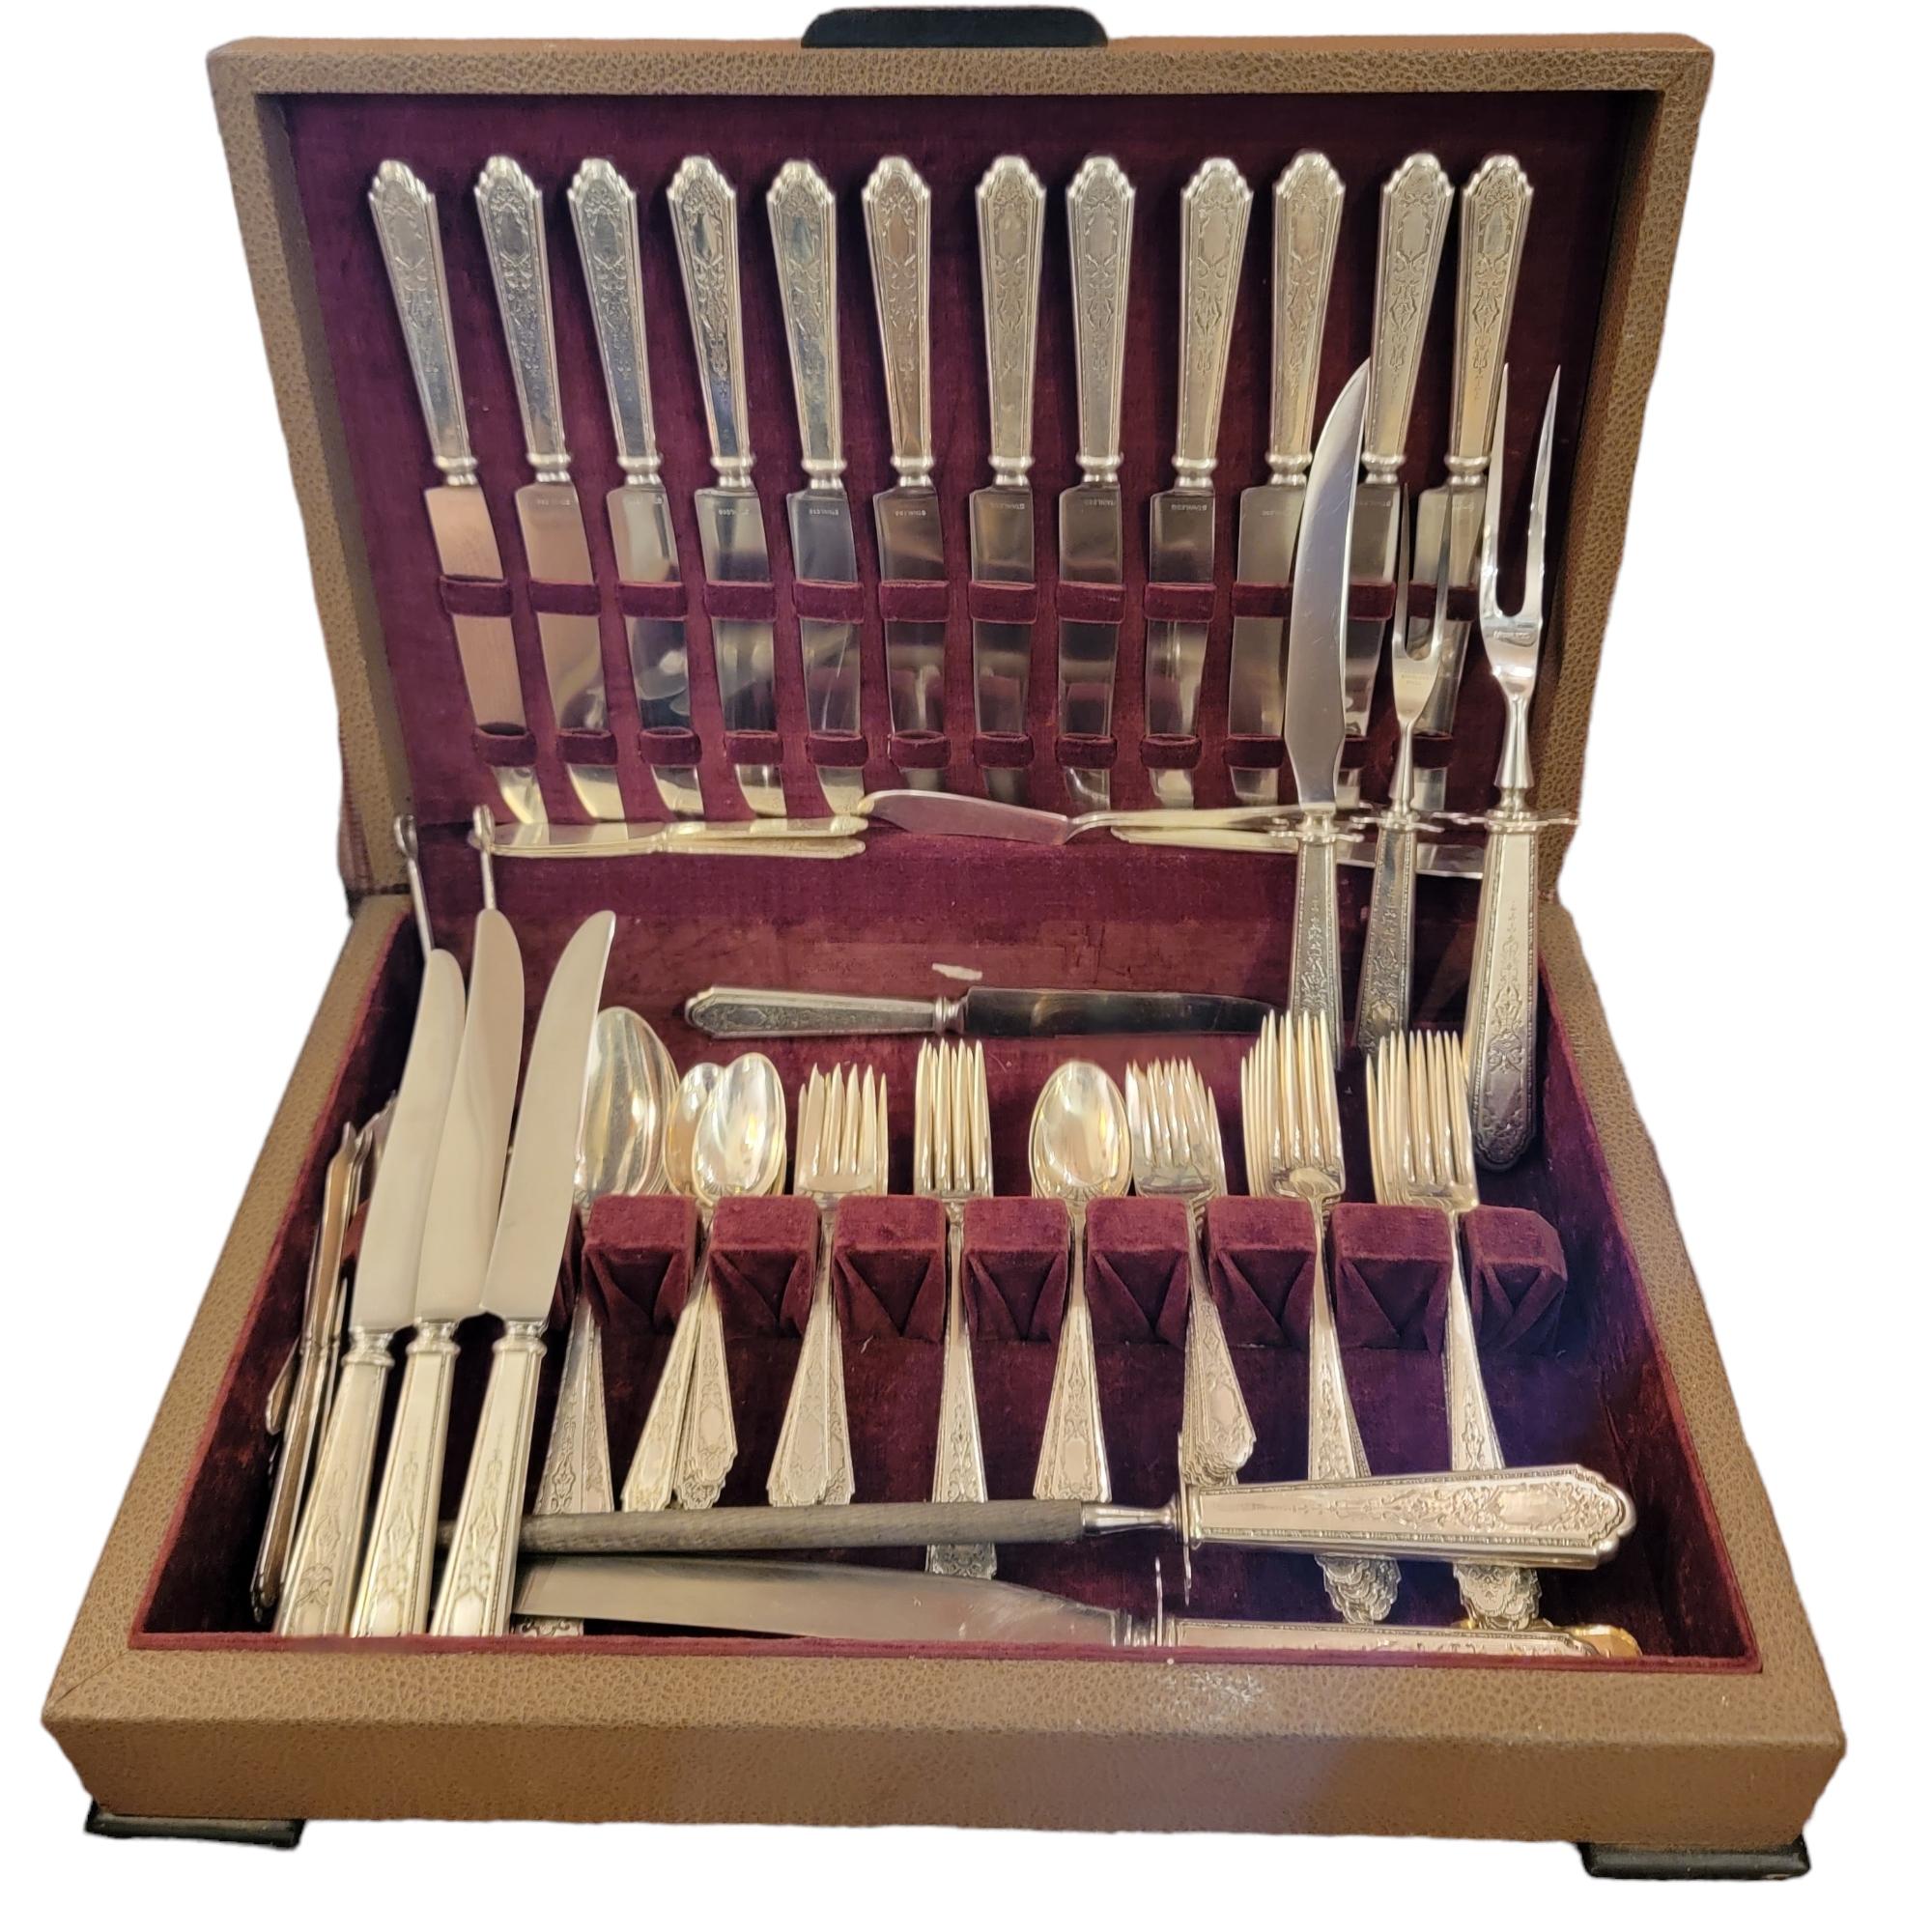 ESTATE 1921 TREASURE STERLING SILVER 91 PIECES FLATWARE SILVERWARE 925
Measurements are approximate and for box size - 17 wide x 15 deep x 4 high

Box will contain -

14 Dinner Knives

2 smaller dinner knives 

Large serving/ carving knife

Medium